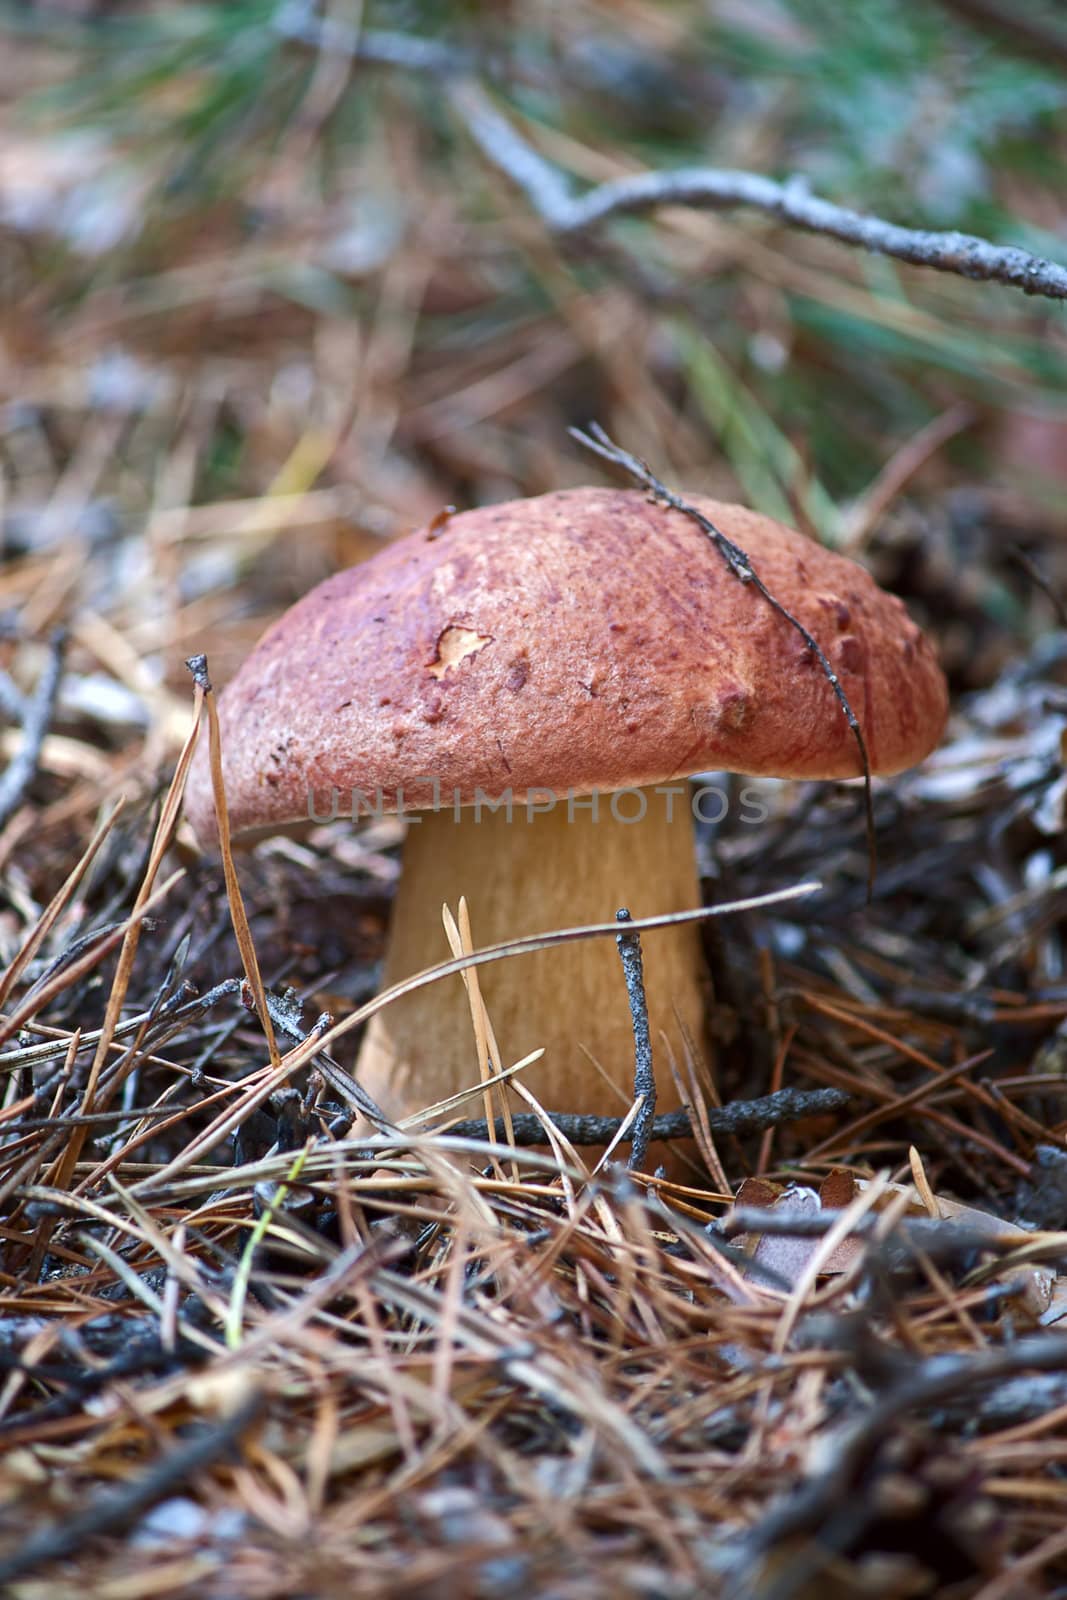 Mushroom in woods. Image with shallow depth of field.